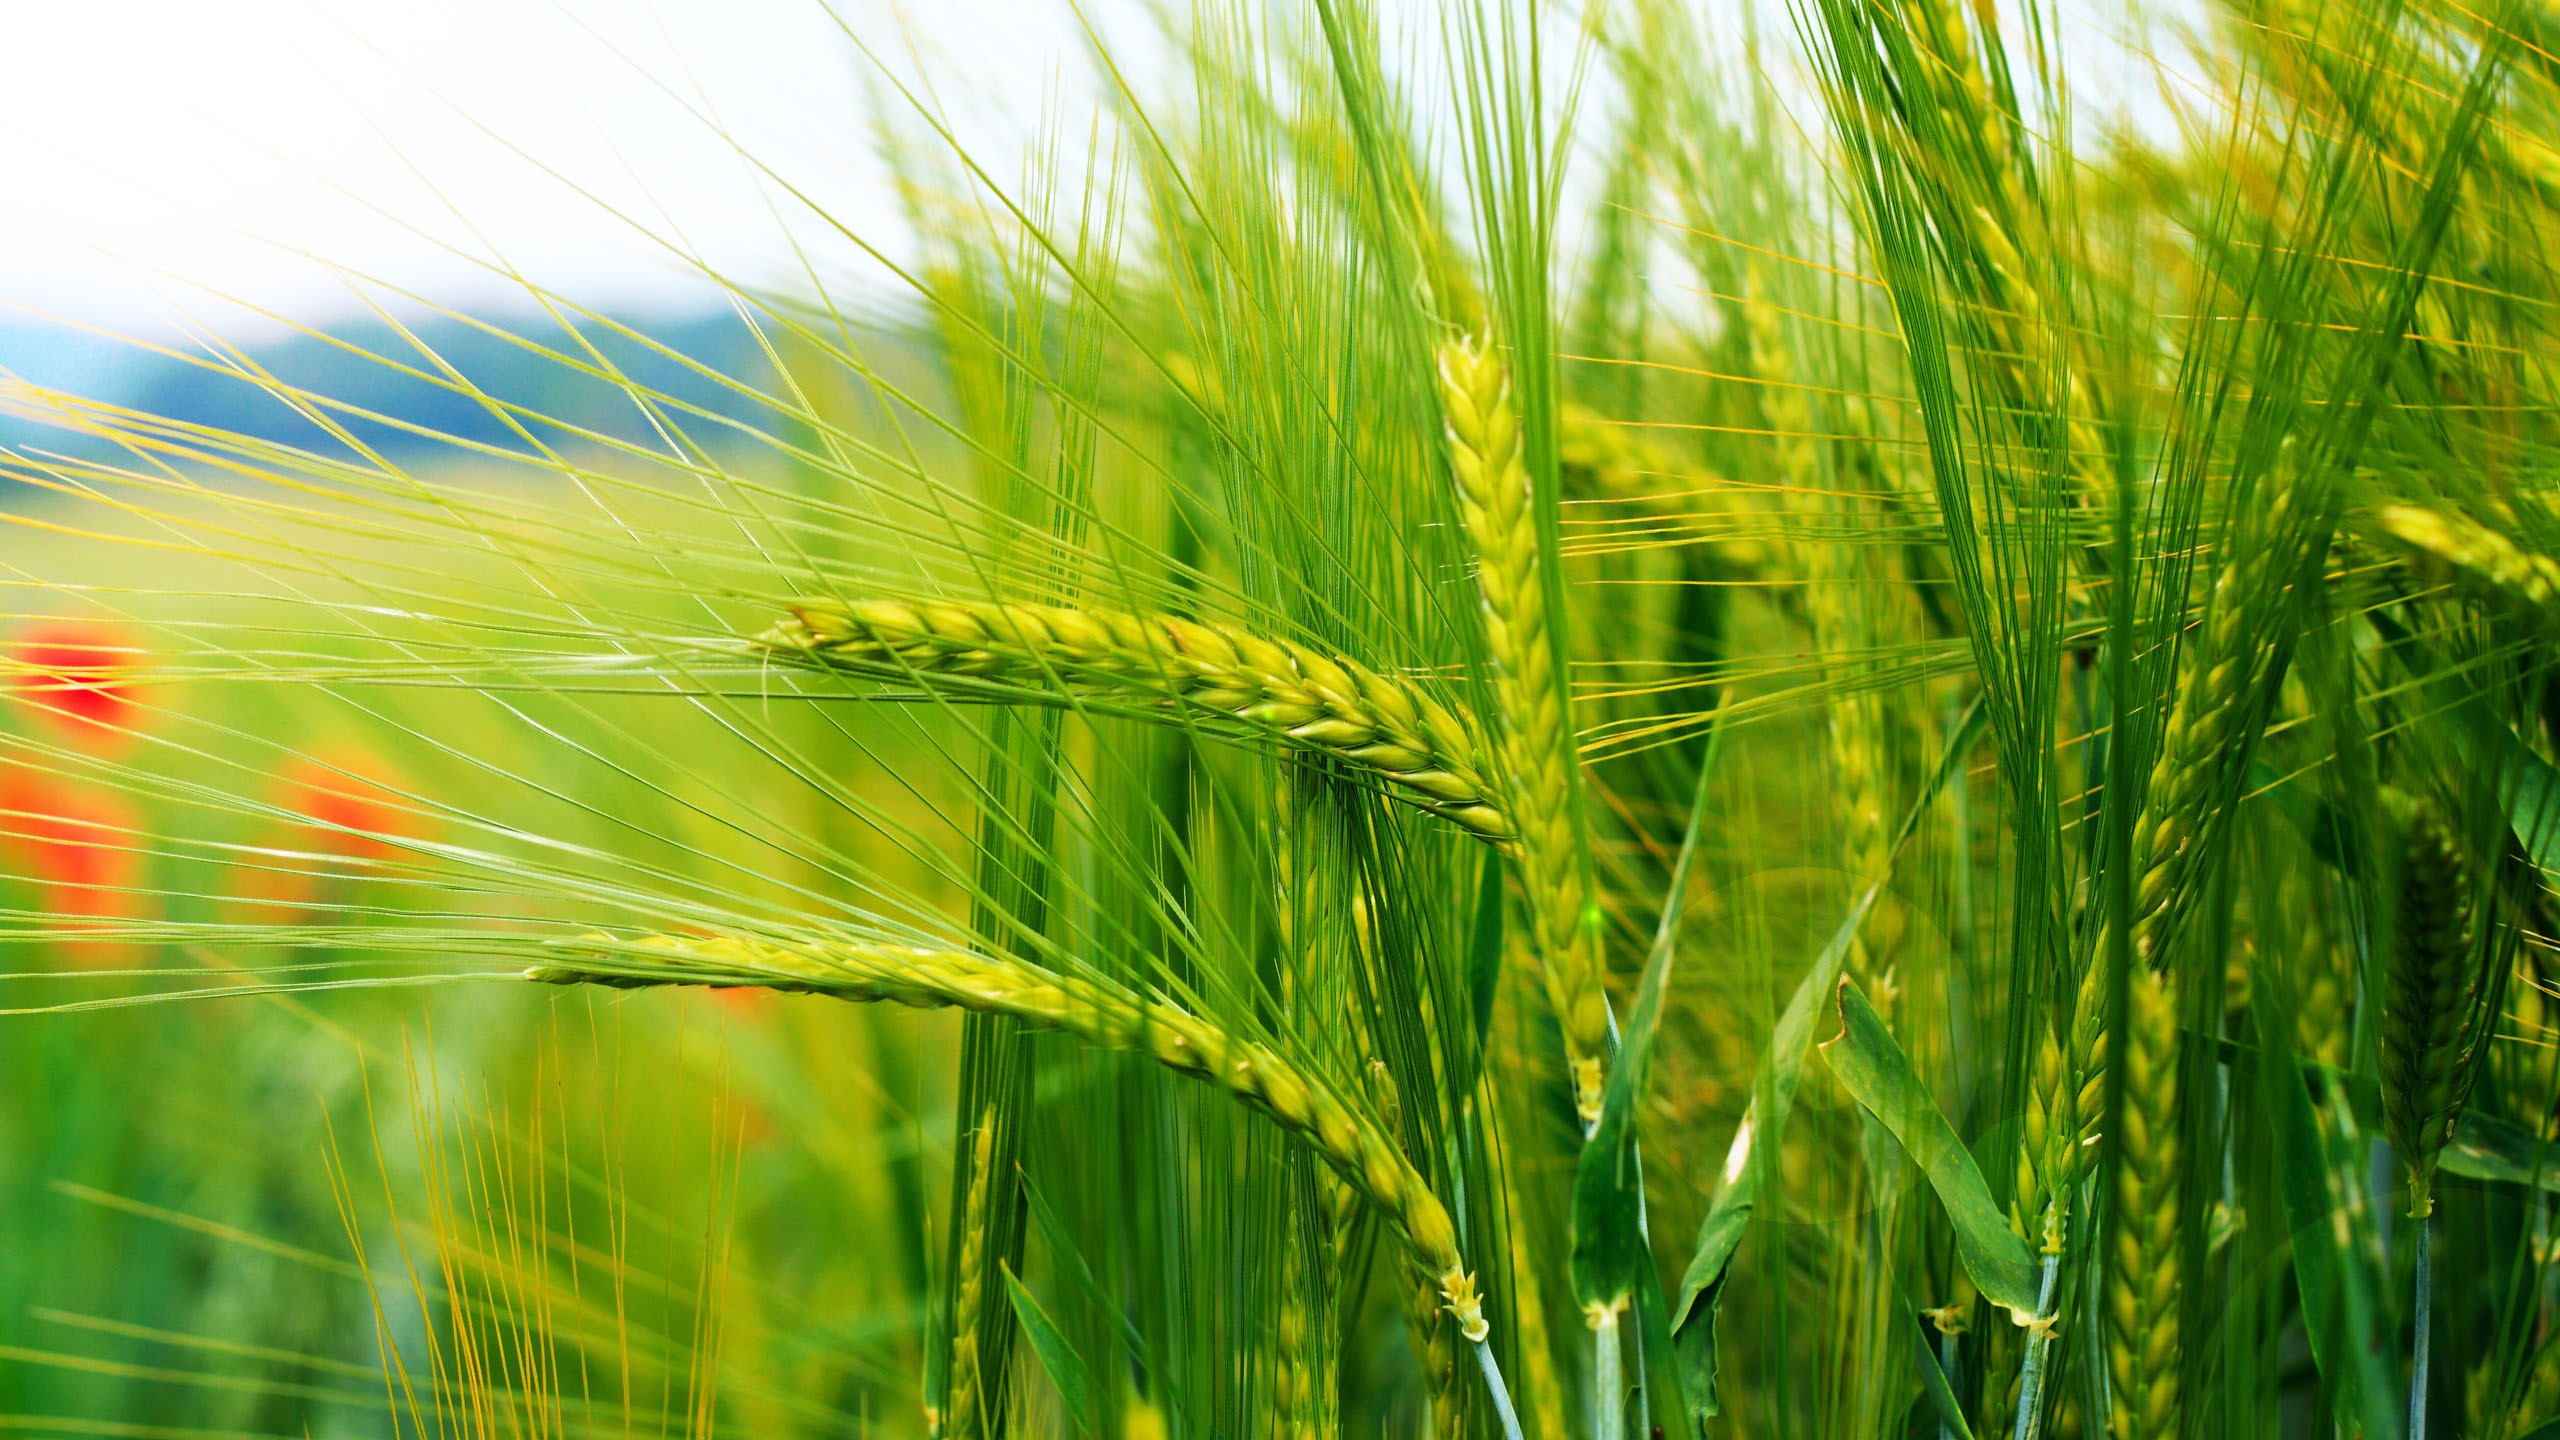 Wheat Nature Spikelets Outdoors 2560x1440